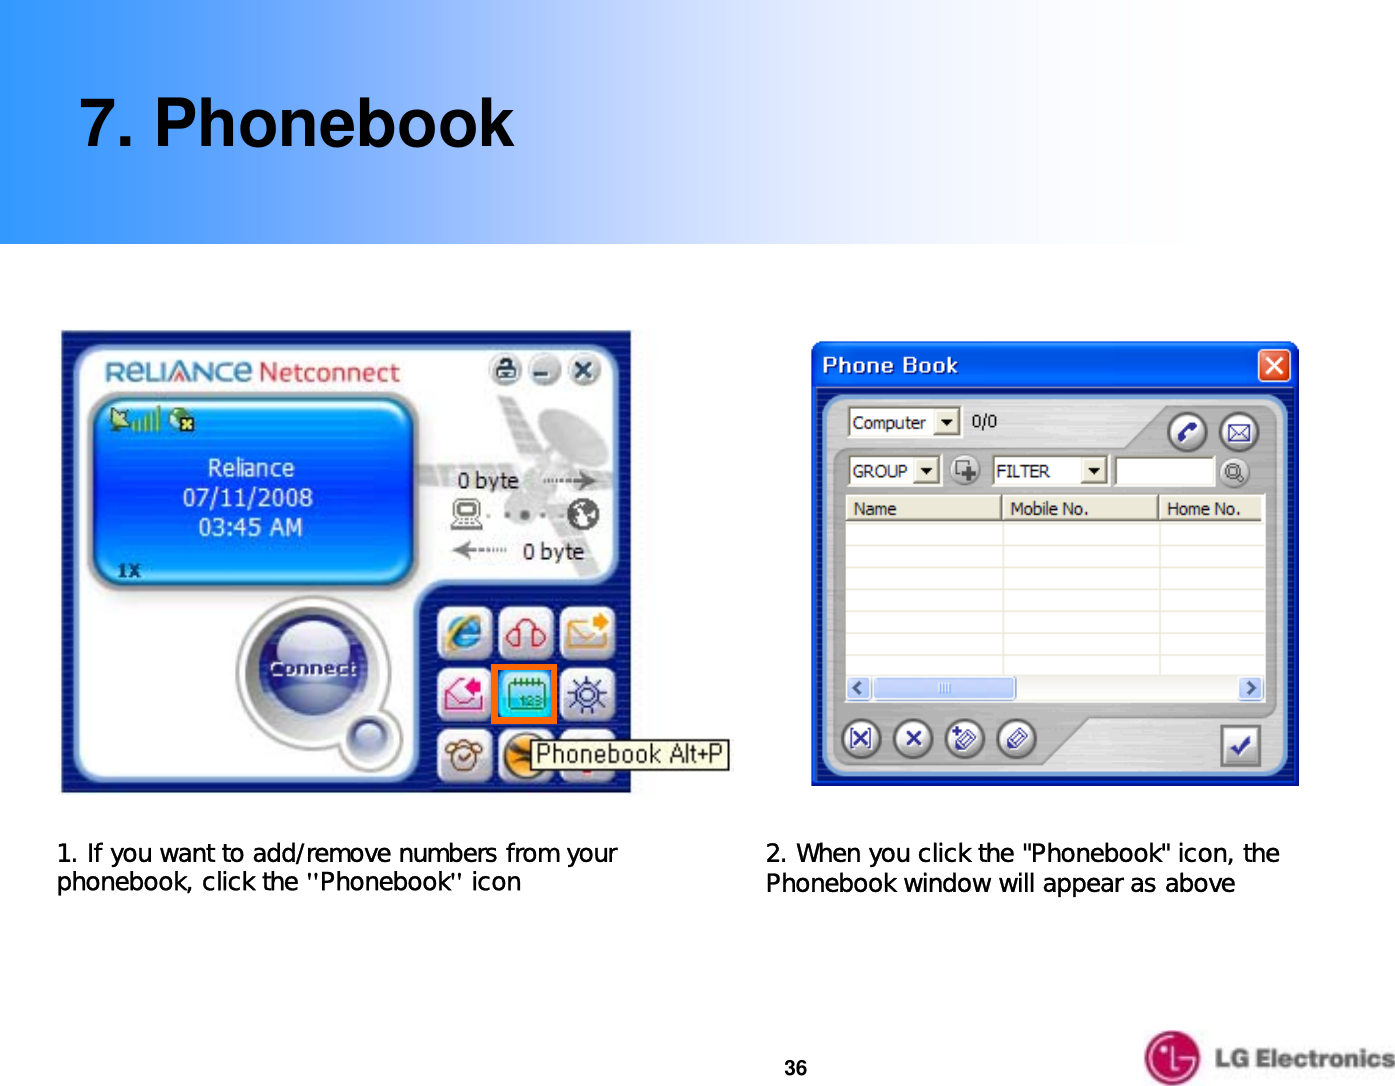 367. Phonebook1. If you want to add/remove numbers from your phonebook, click the &quot;Phonebook&quot;icon 2. When you click the &quot;Phonebook&quot; icon, the Phonebook window will appear as above